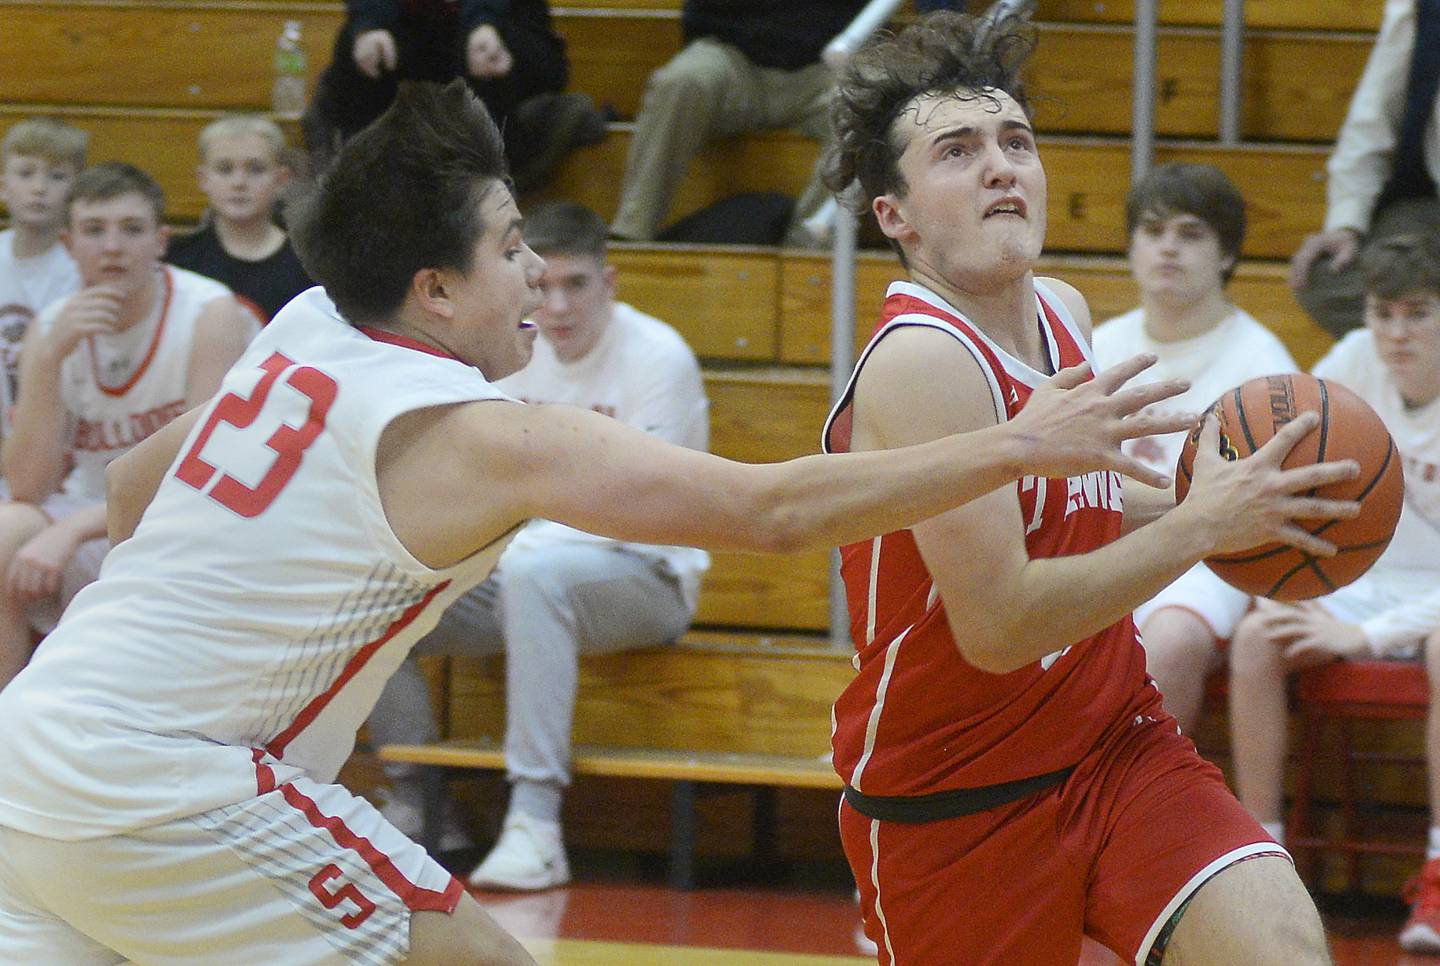 Ottawa Levi Sheehan eyes the basket while trying to cut past Streator defender Logan Aukland (23) in the second quarter Saturday, Dec. 10, 2022, at Pops Dale Gymnasium in Streator.